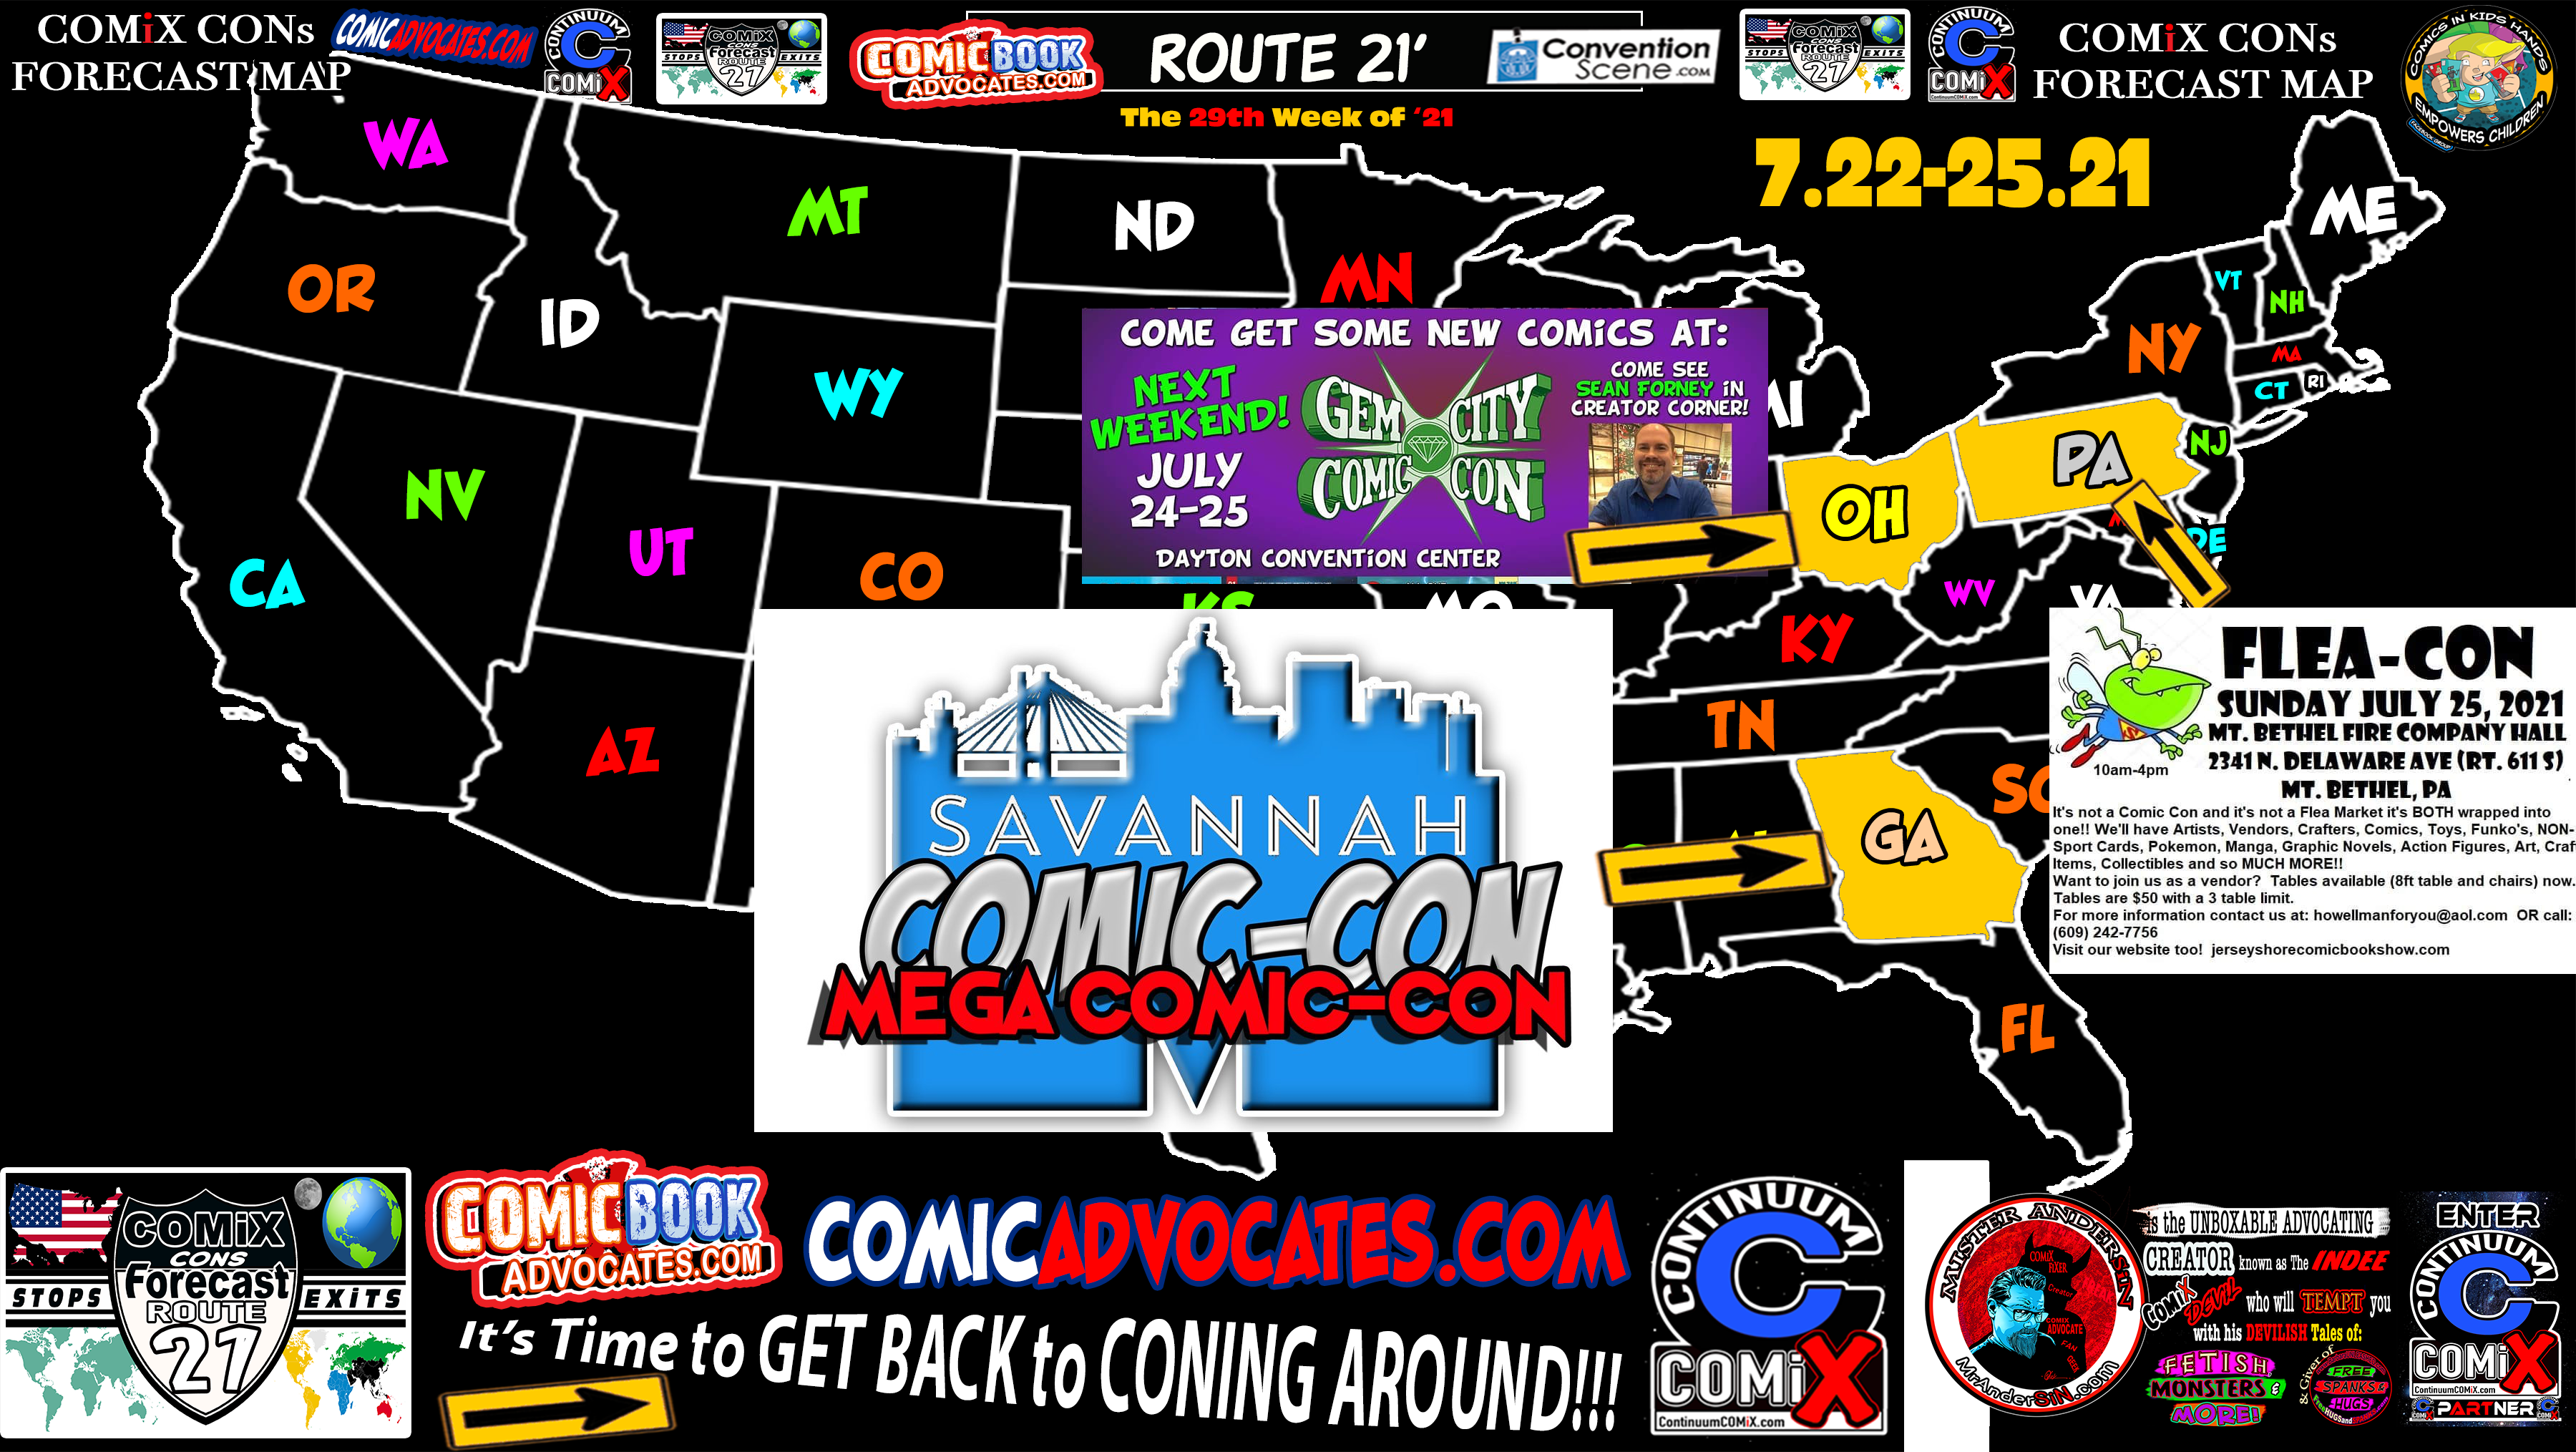 The COMiXcon ForeCast on THE COMiX NEWS WiRE for the 29th Week of ’21